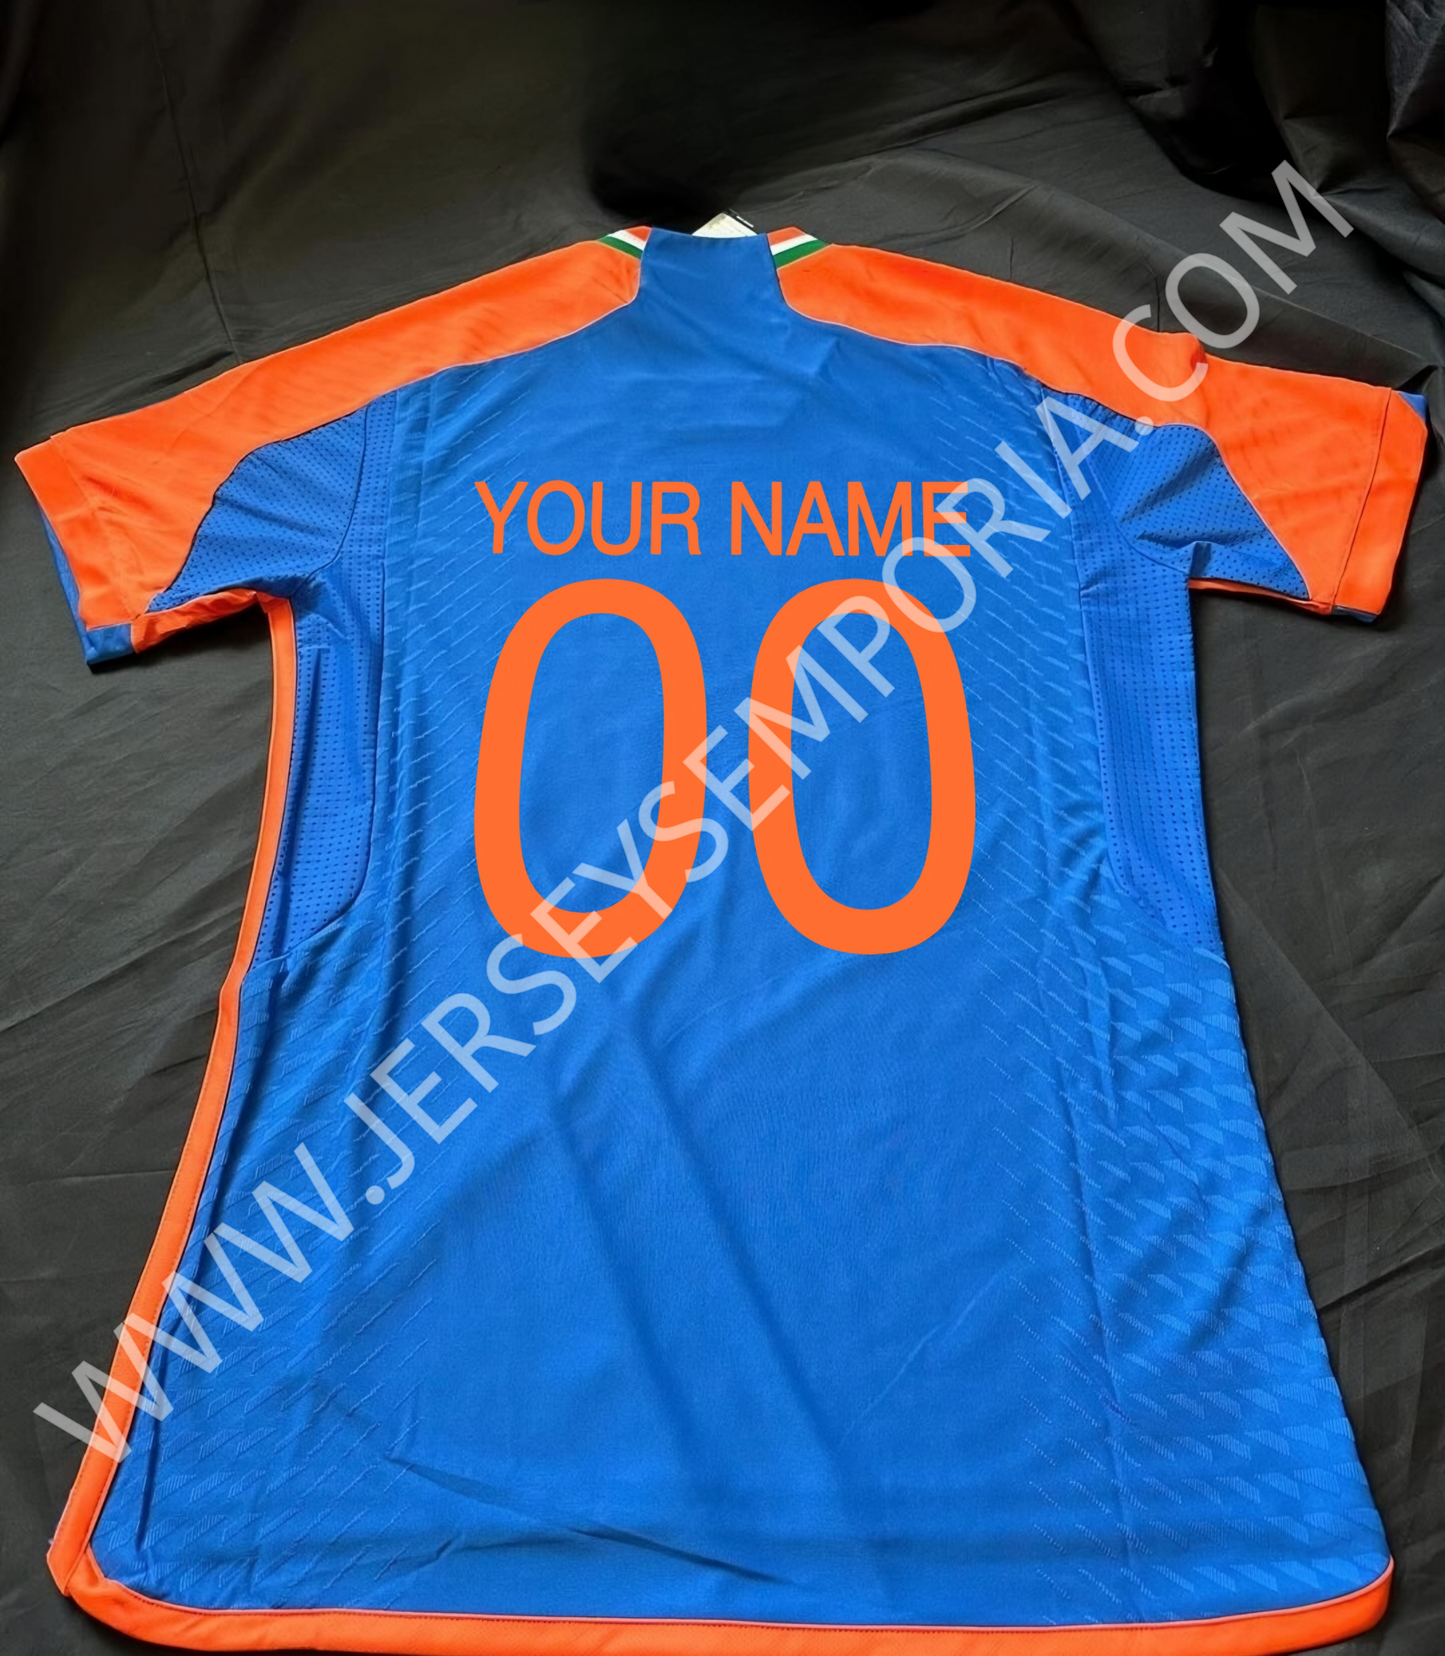 Customized T-20 jerseys 
Customized T-20 jerseys 
T-20 
T-20 wold cup Jersey 2024
Your name t-20 jerseys 
Player edition Jersey
Personalised jerseys 
Personalised t-20 jerseys 2024
Customized T-20 world cup t
Your name customized t-20 jerseys 
Virat Kohli t-20 jerseys 
Rohit Sharma jerseys 
Virat Kohli jerseys 
Rohit Sharma signature Edition jerseys 
Virat Kohli t-20 jerseys 